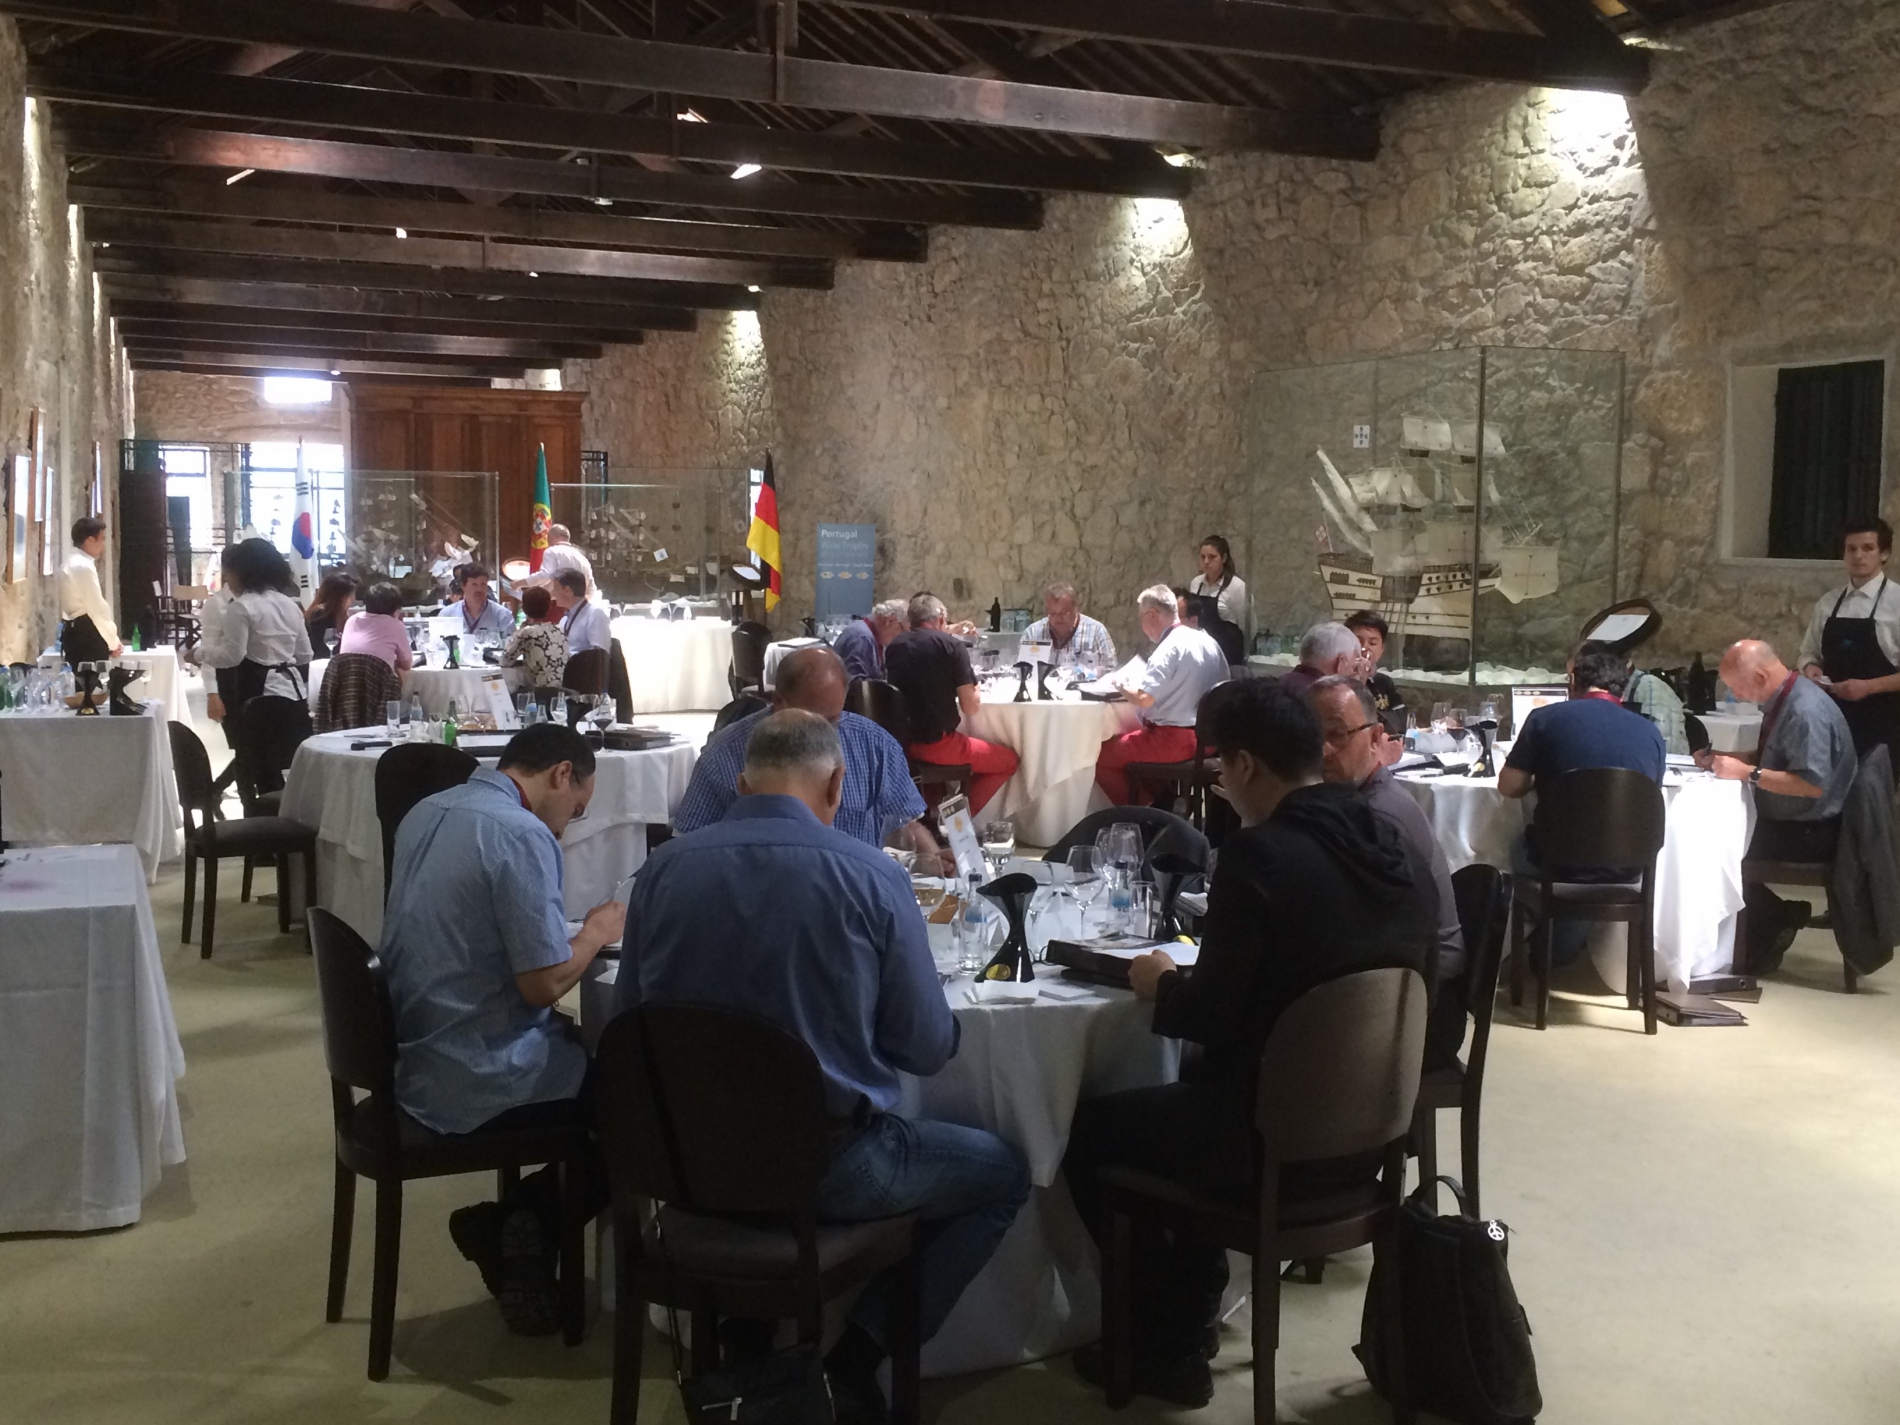 Over 1200 samples at the Portugal Wine Trophy competition